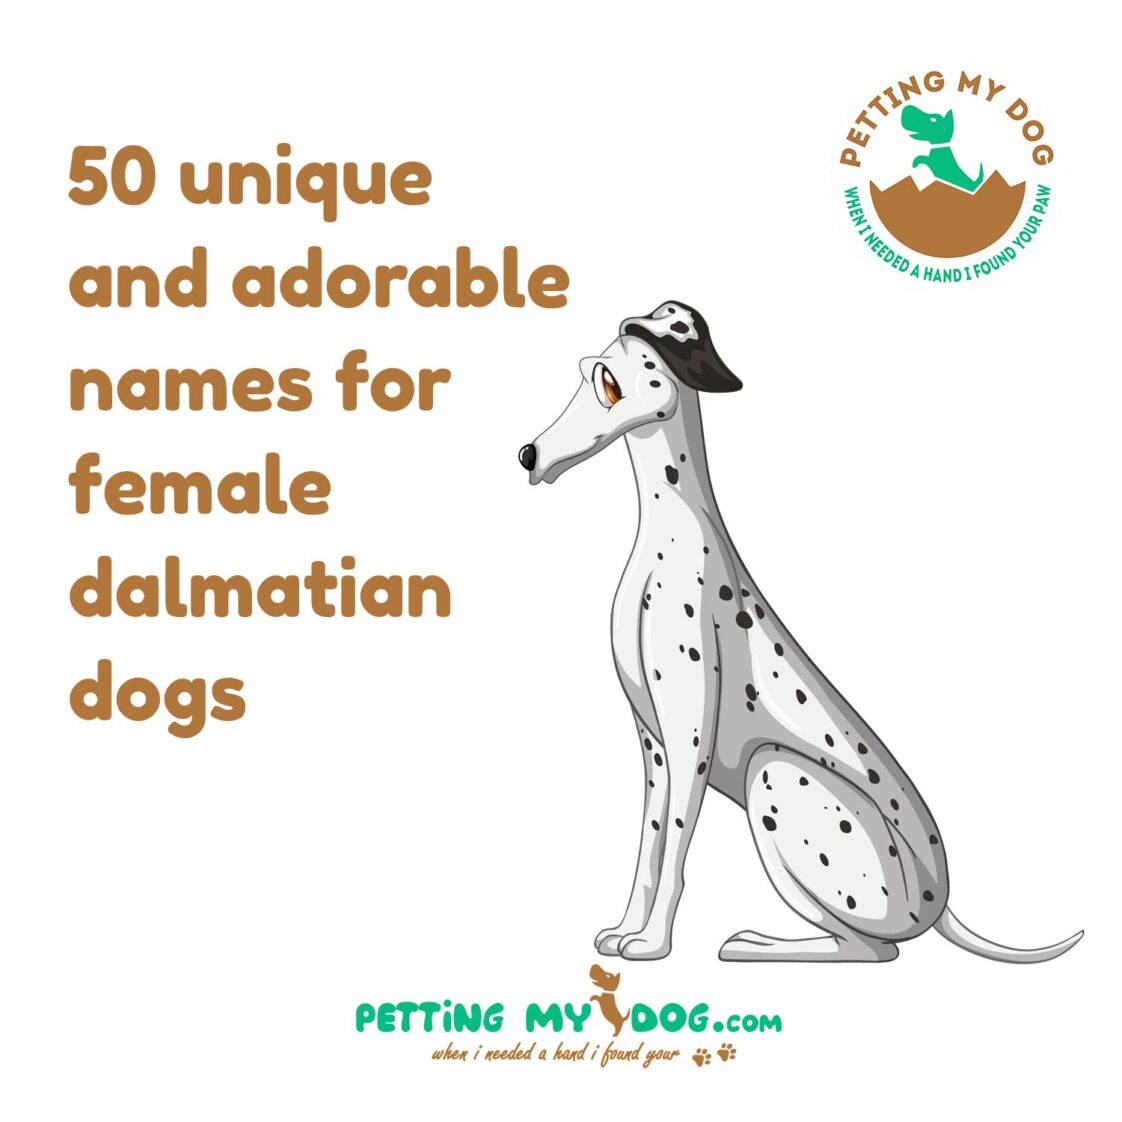 50 unique and adorable names for your female dalmatian dog